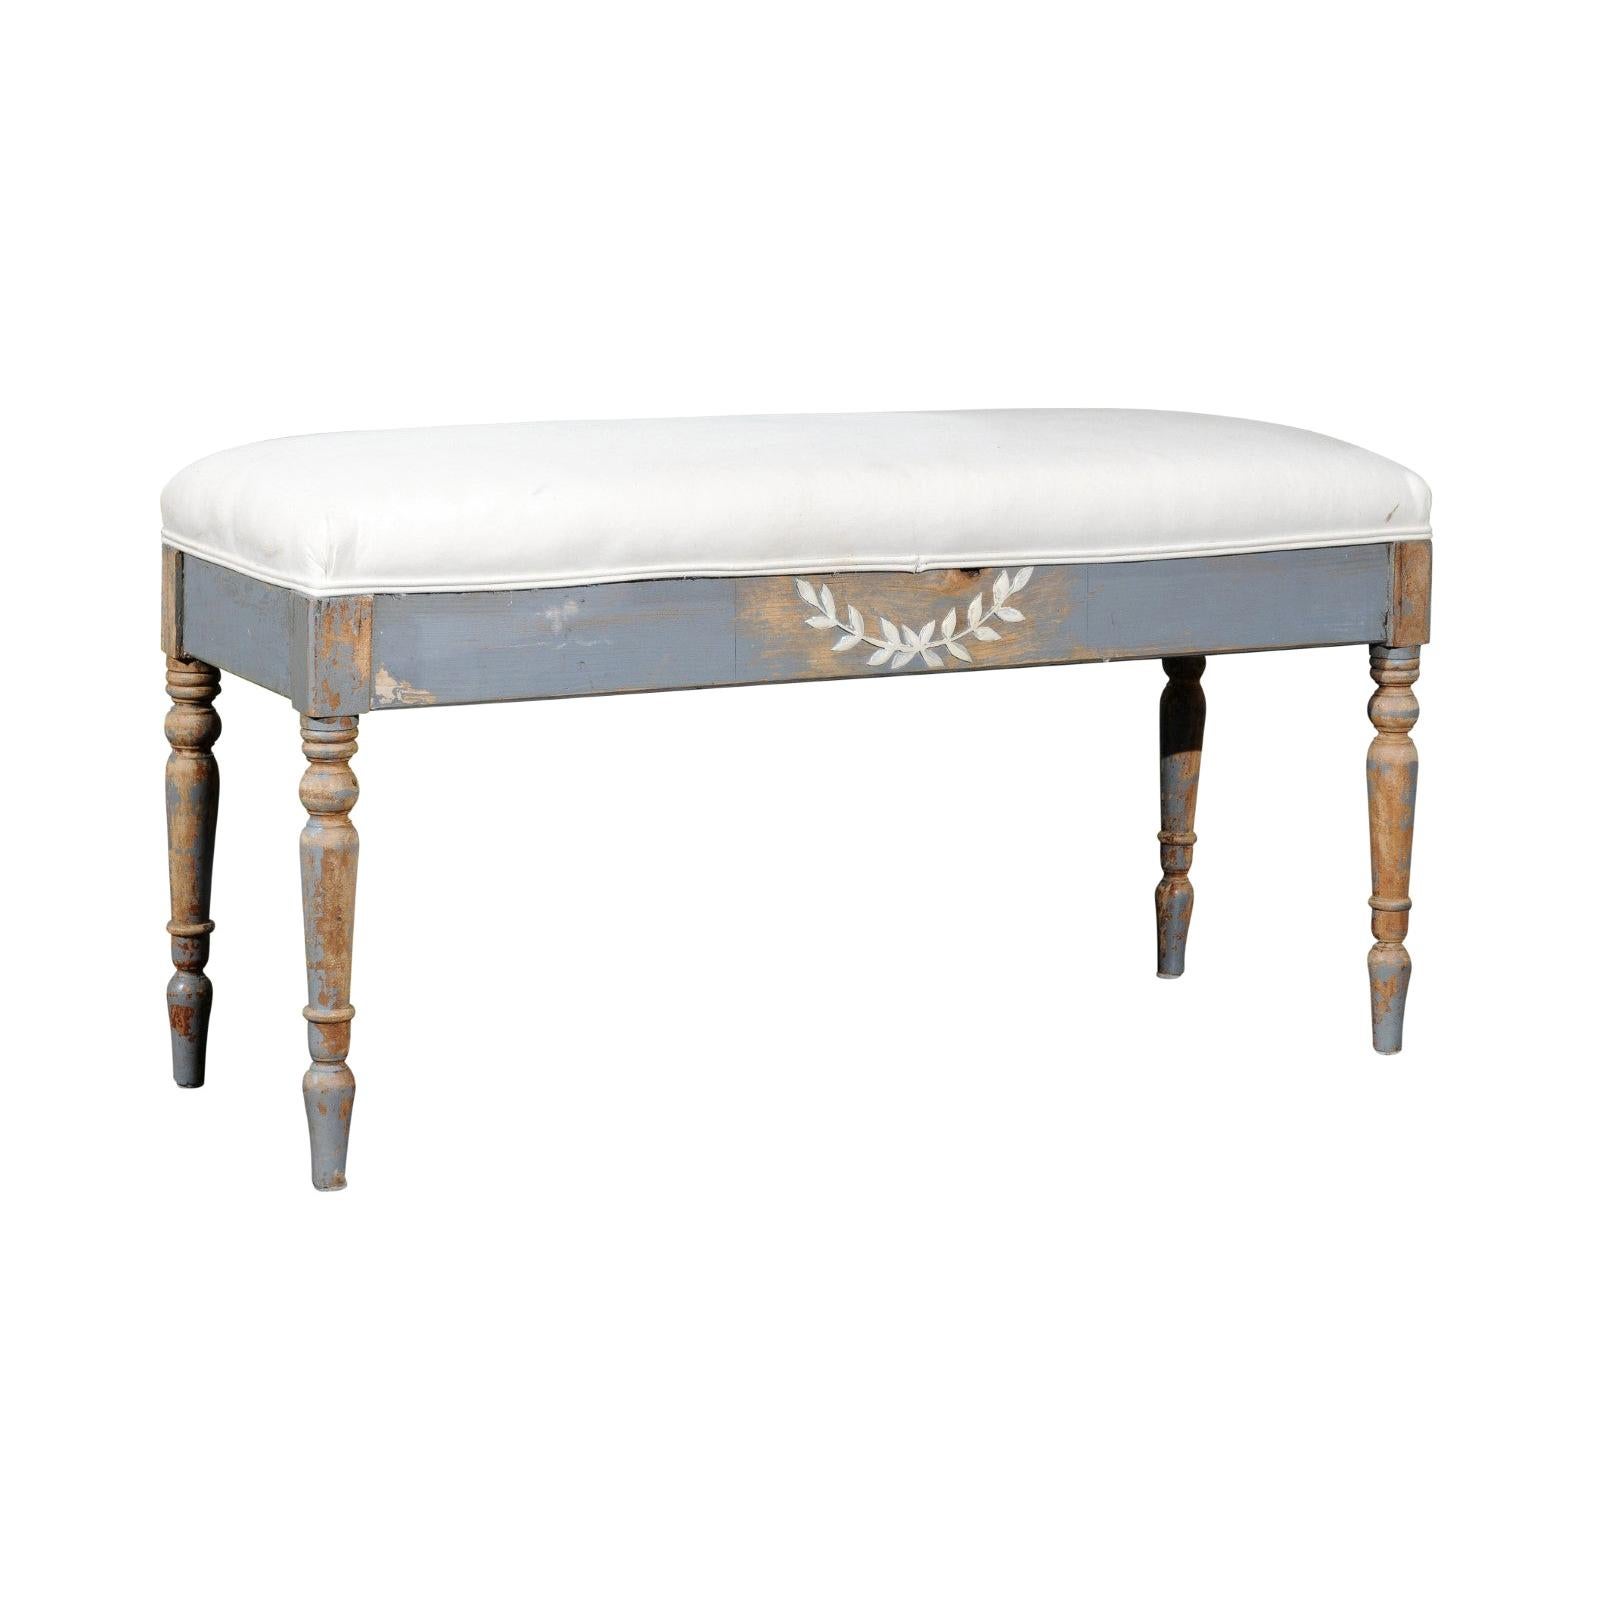 Swedish 1920s Neoclassical Style Painted Wood Bench with Laurel Wreath Motif